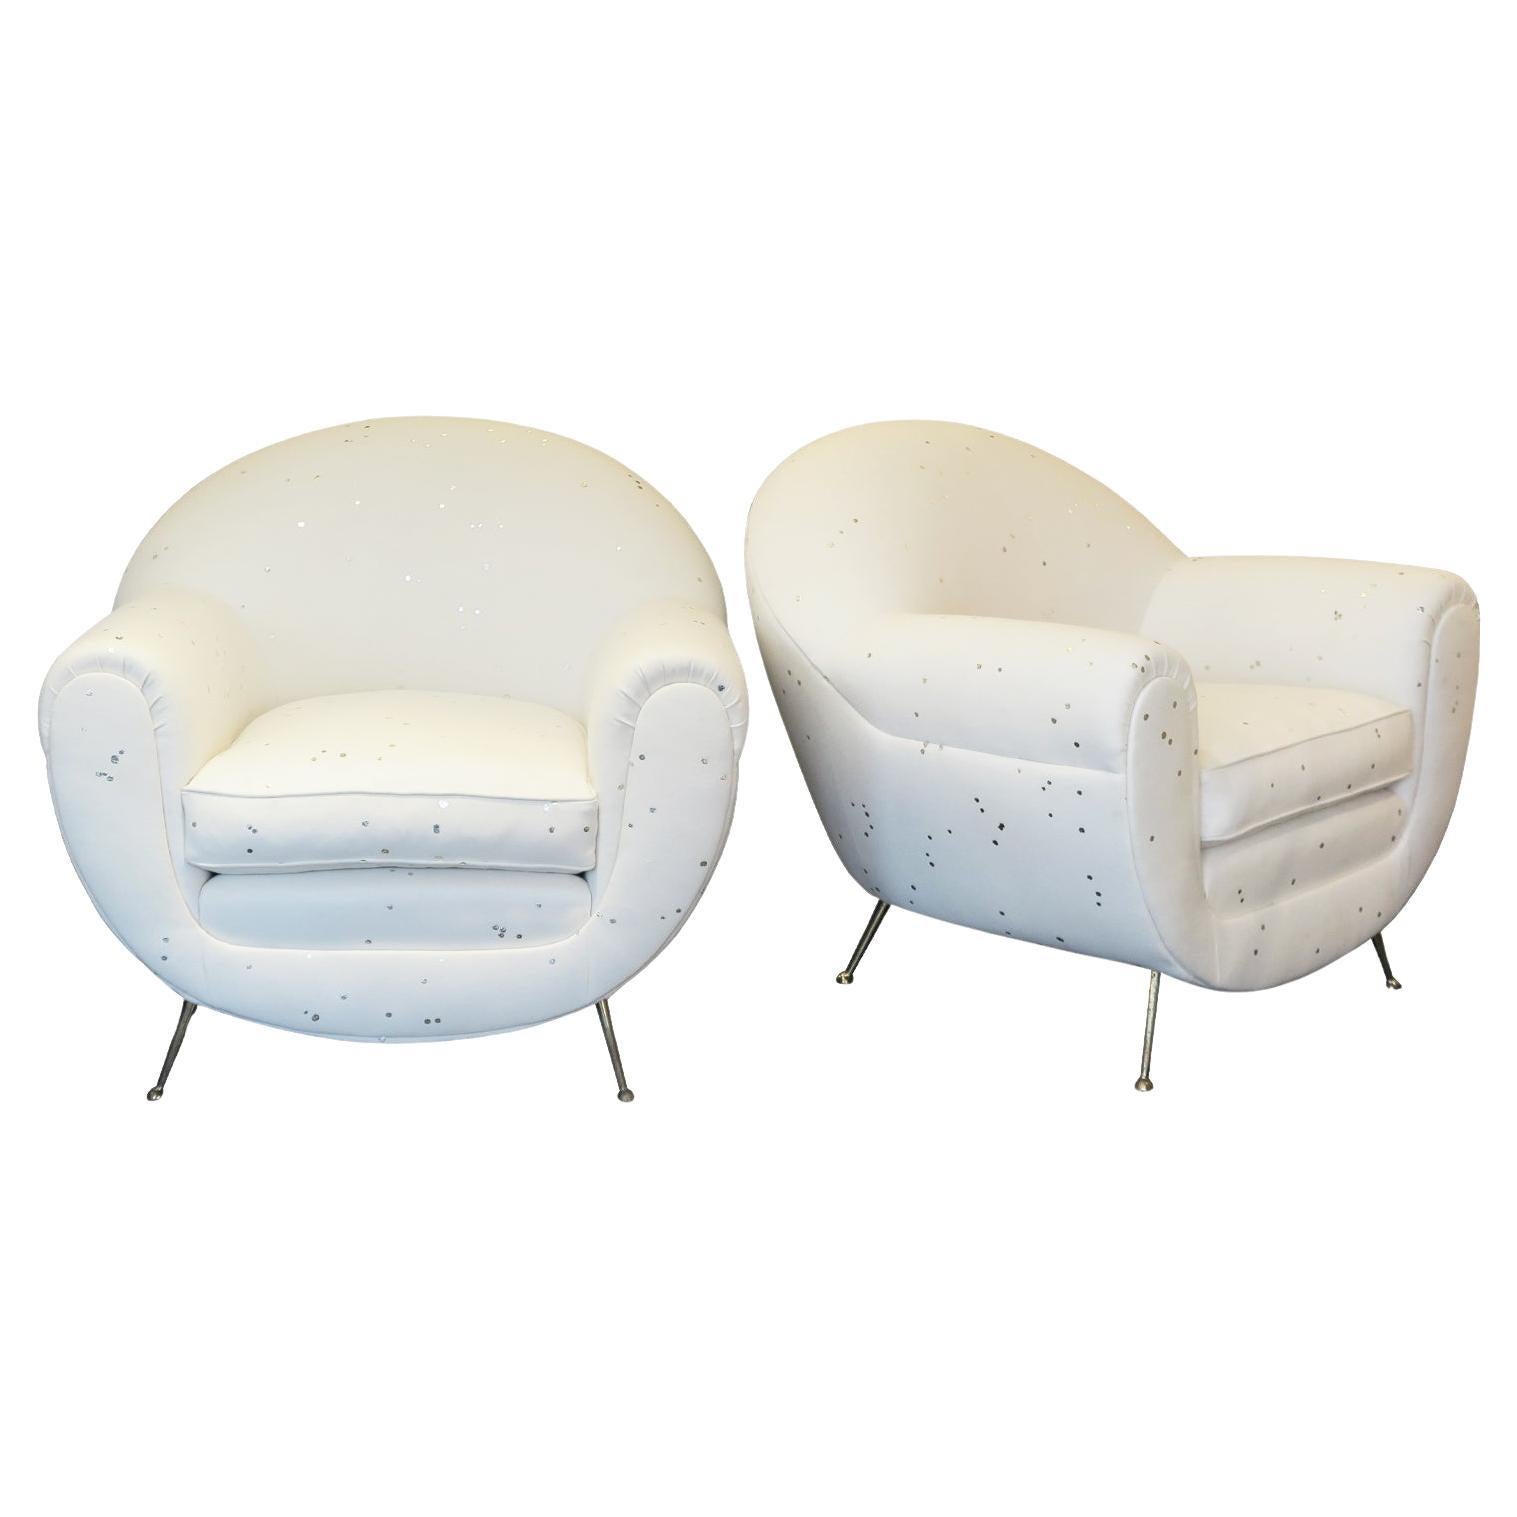 Pair of Italian Mid-Century Lounge Chairs with Rounded Design